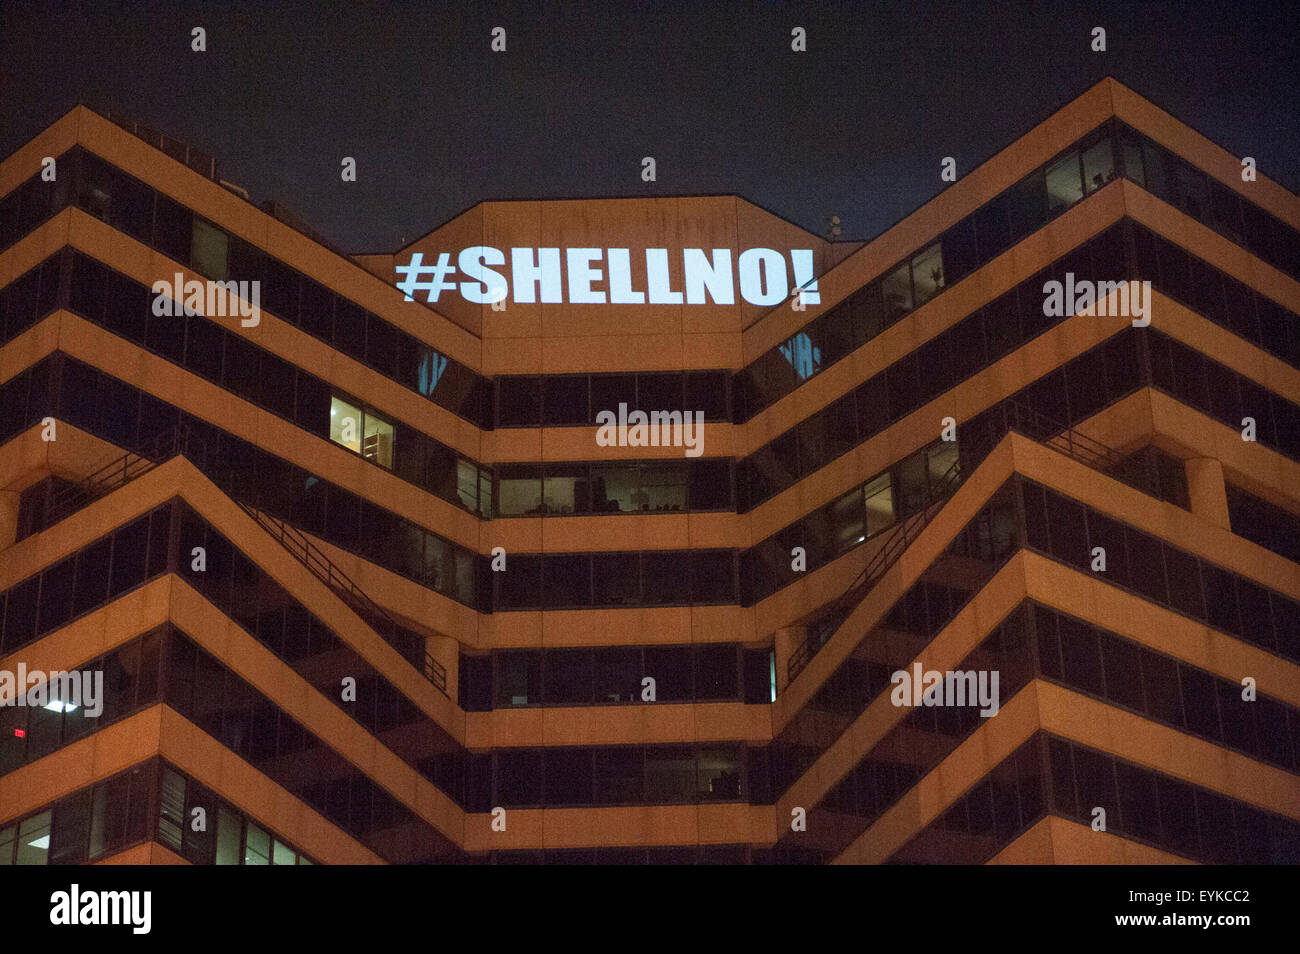 Washington, DC, USA. 30th July, 2015. Messages calling for action on climate change and attacking corporate polluters are projected on the headquarters of the American Petroleum Institute by the Sierra Club in collaboration with a group known as The Illuminators. © Jay Mallin/ZUMA Wire/Alamy Live News Stock Photo